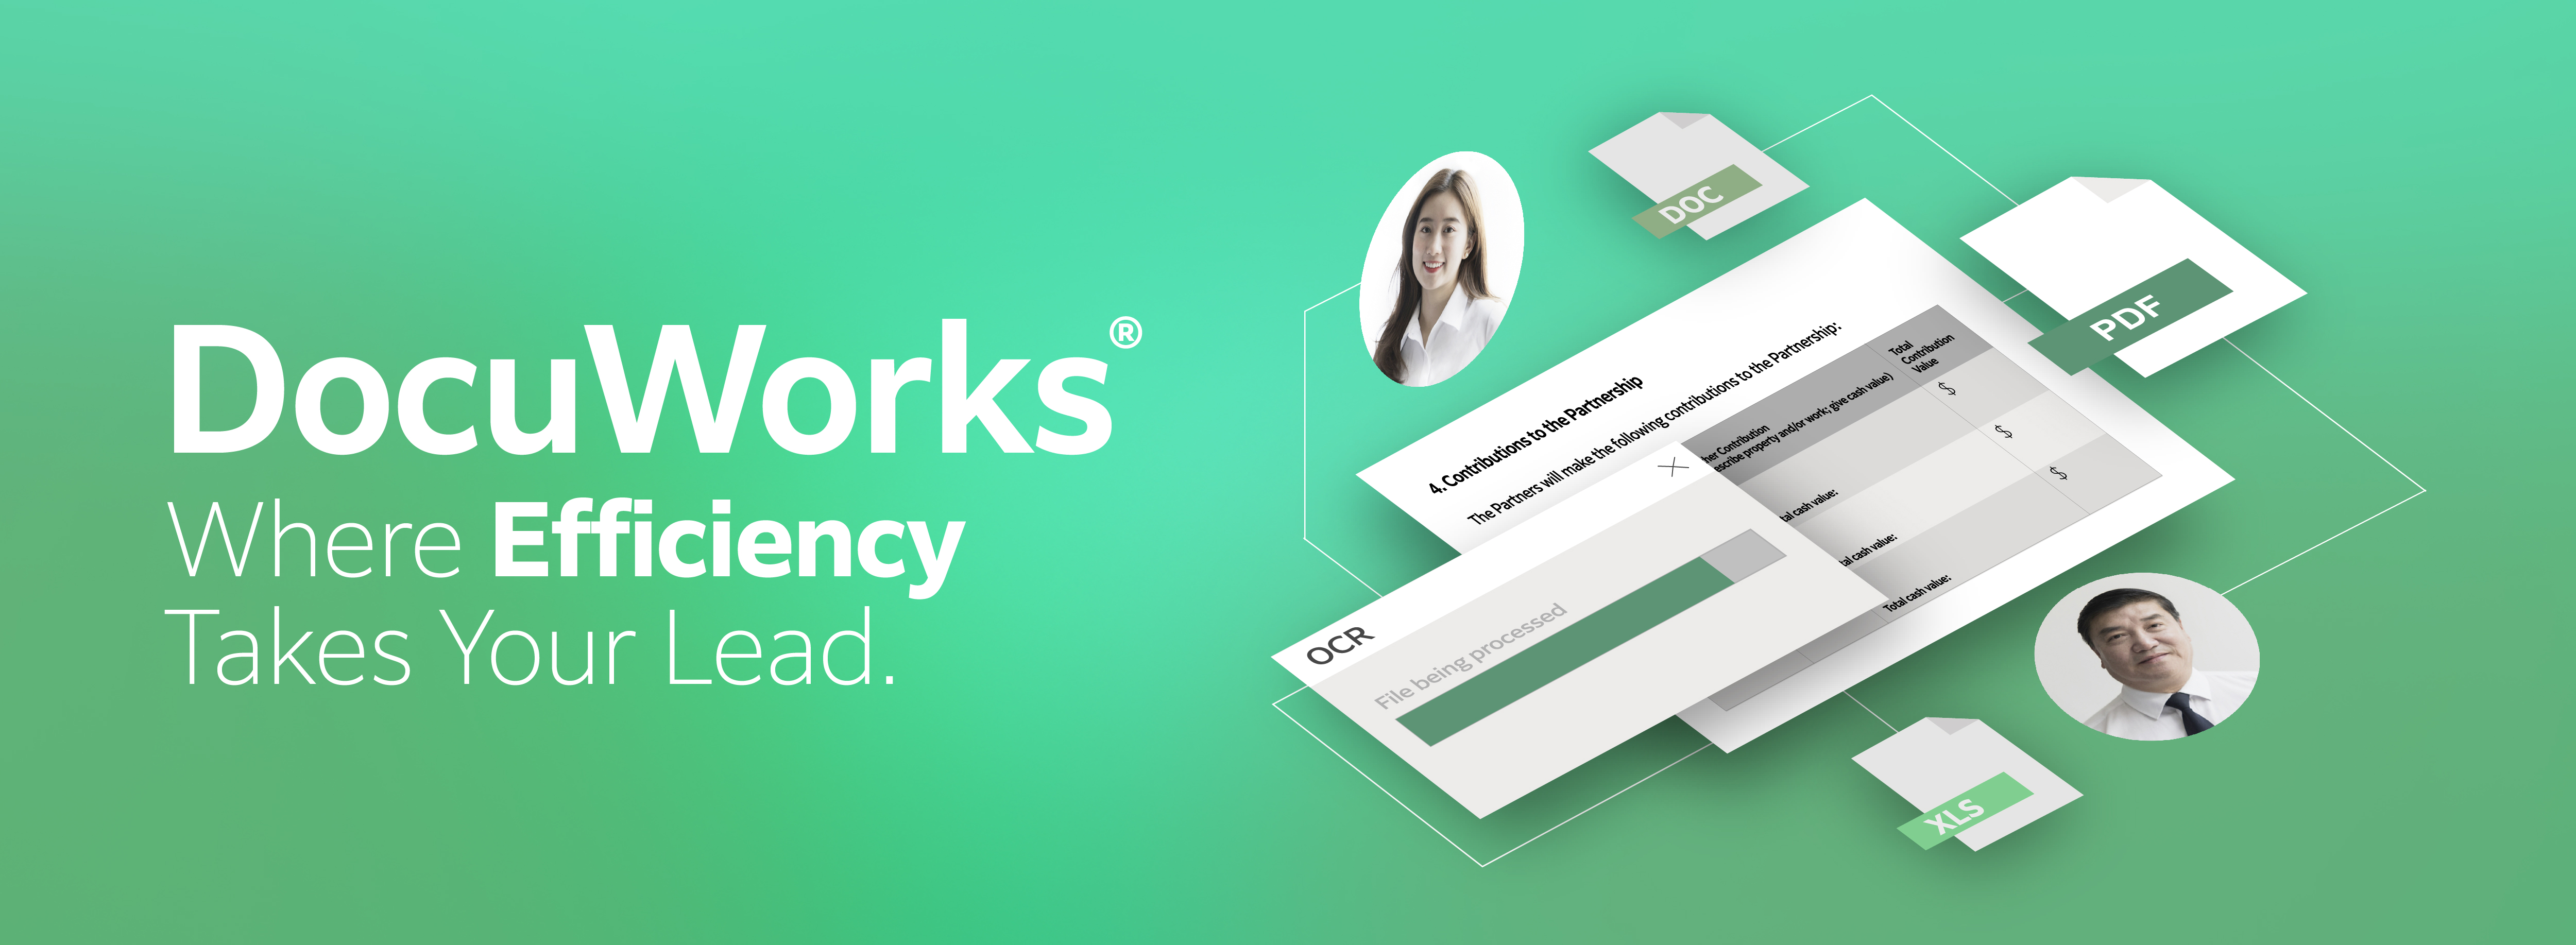 DocuWorks - Where Efficiency Takes Your Lead.